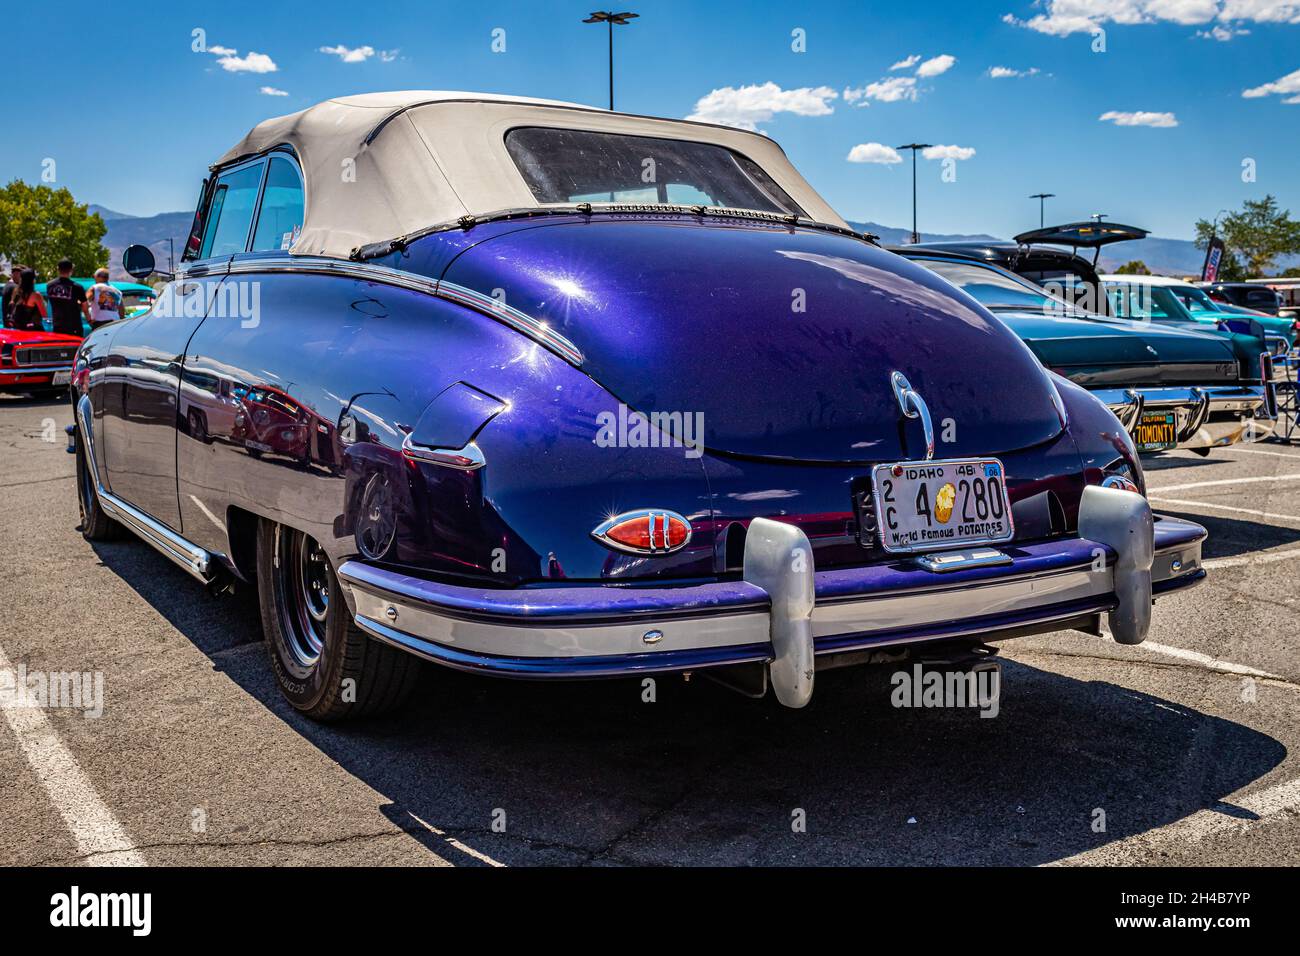 Reno, NV - August 4, 2021: 1948 Packard Super 8 Convertible at a local car show. Stock Photo